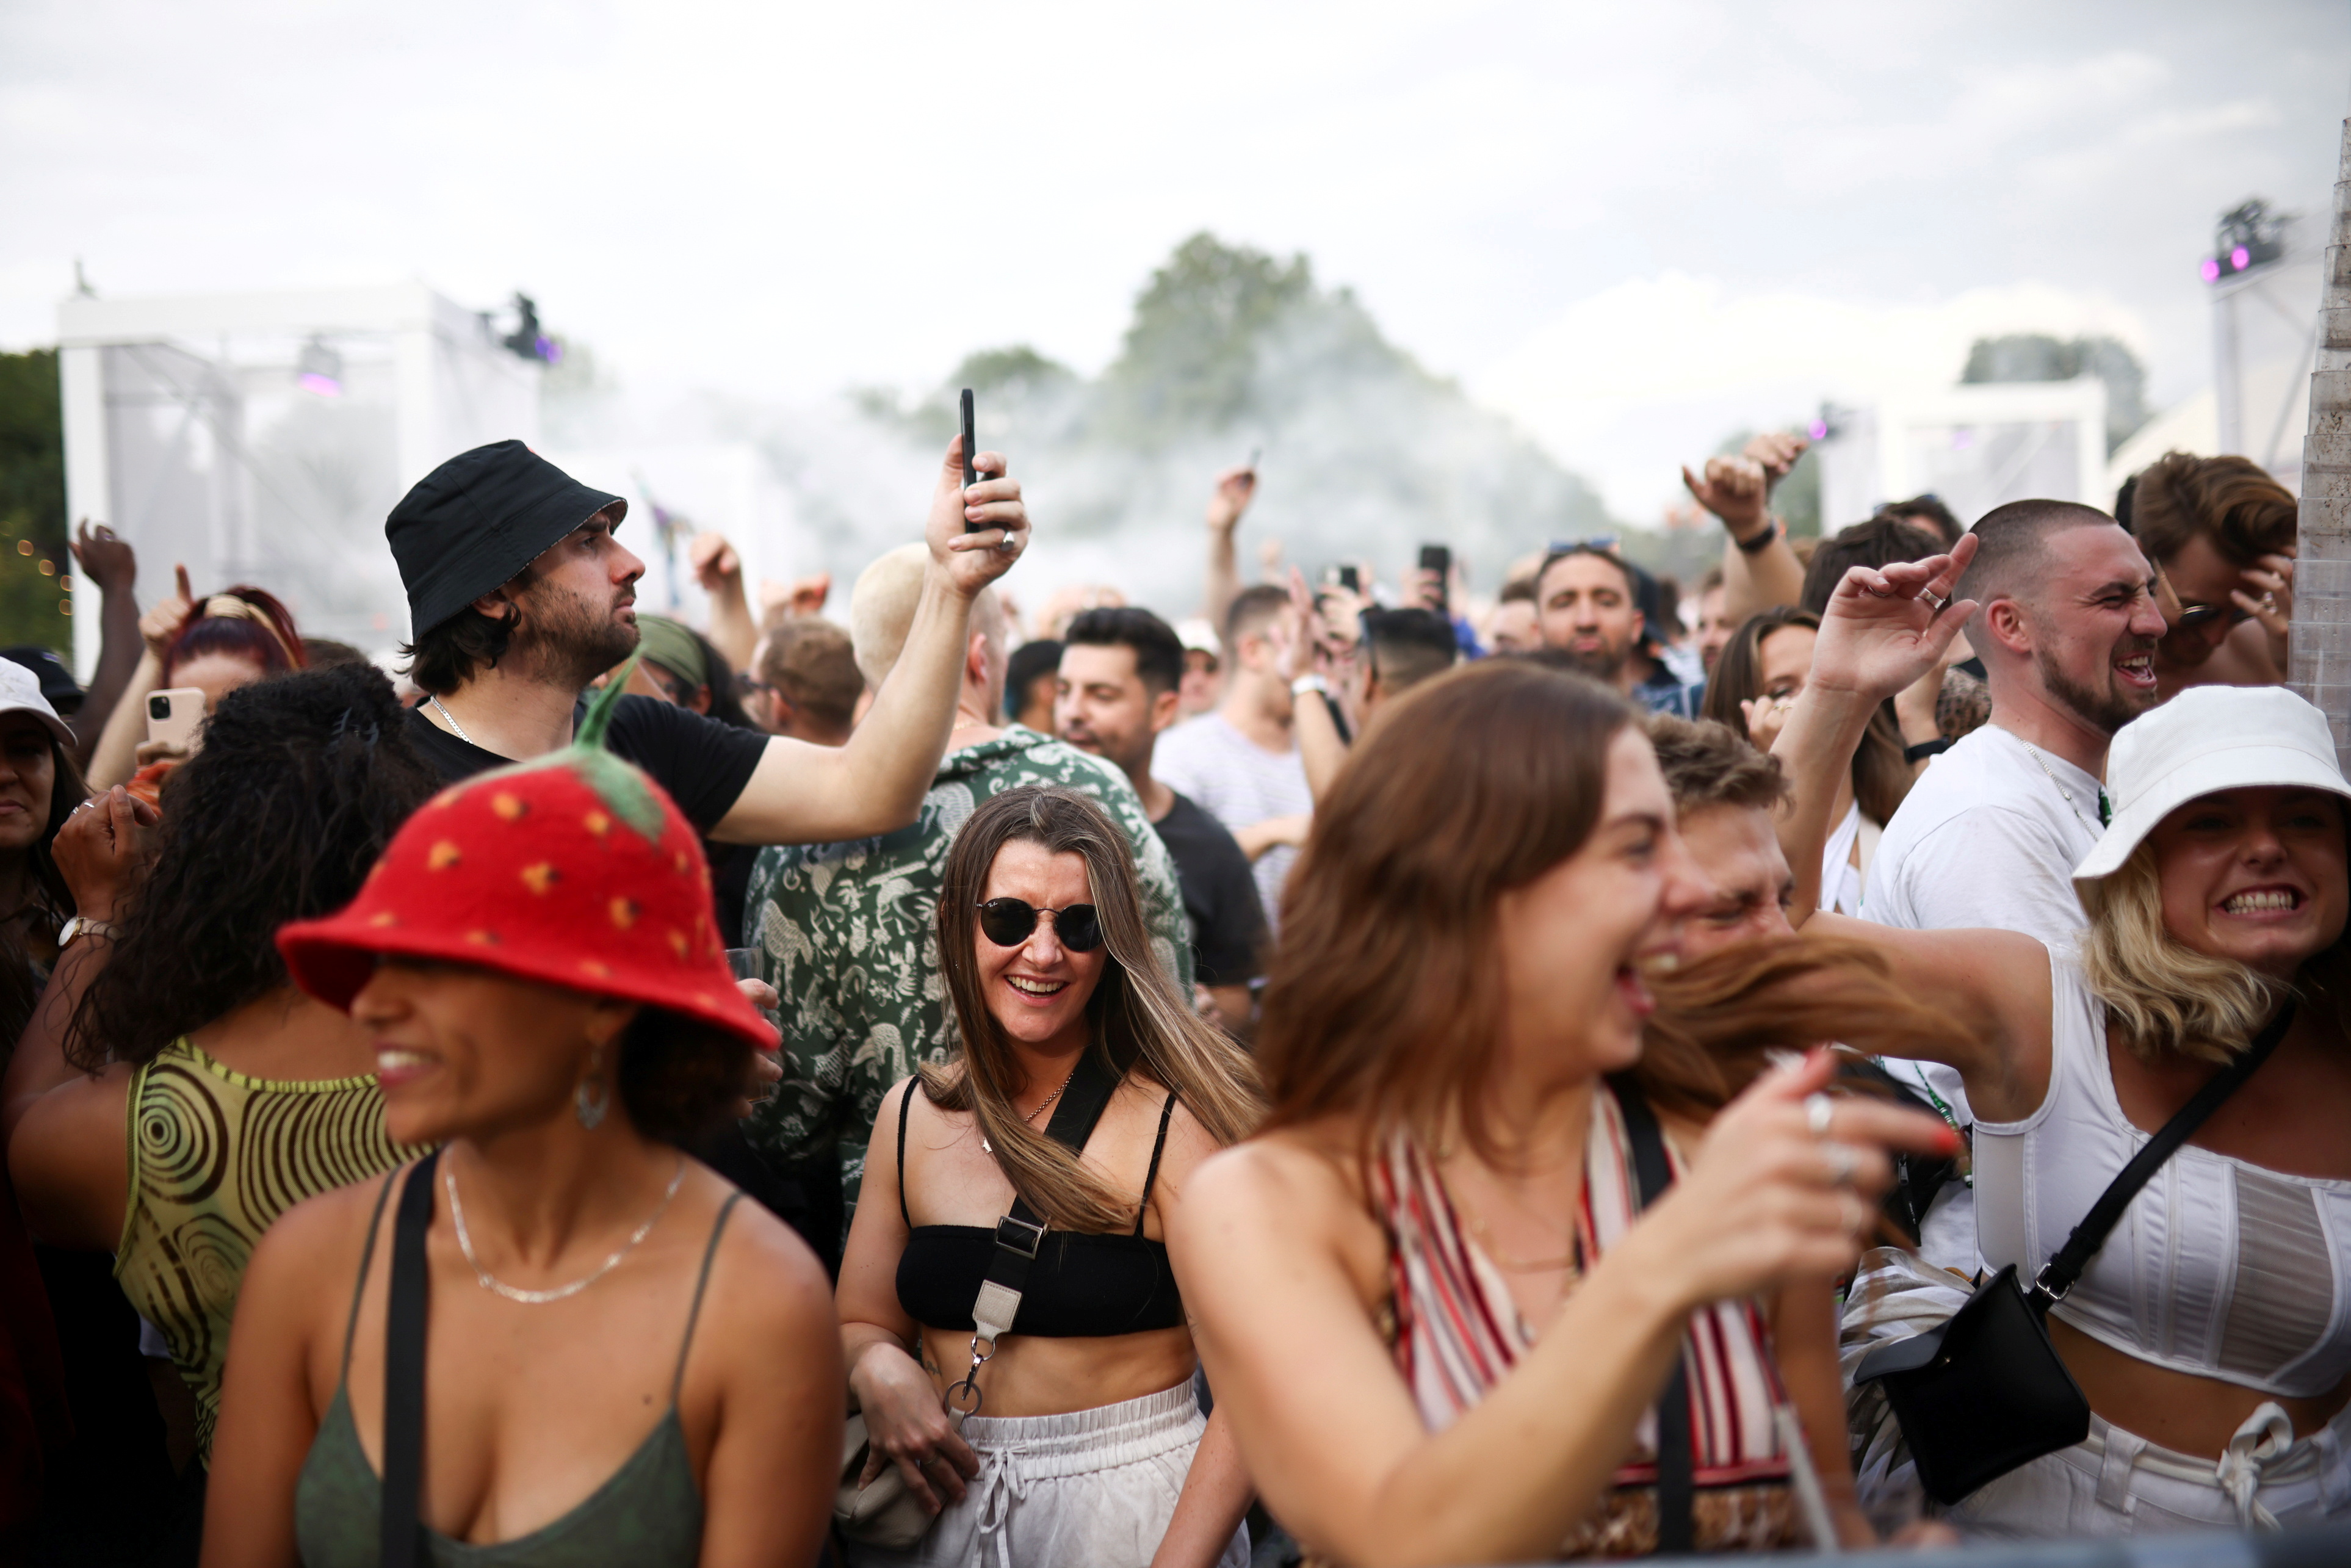 Festivals for Britain as events get $1 bln COVID reinsurance cover ...